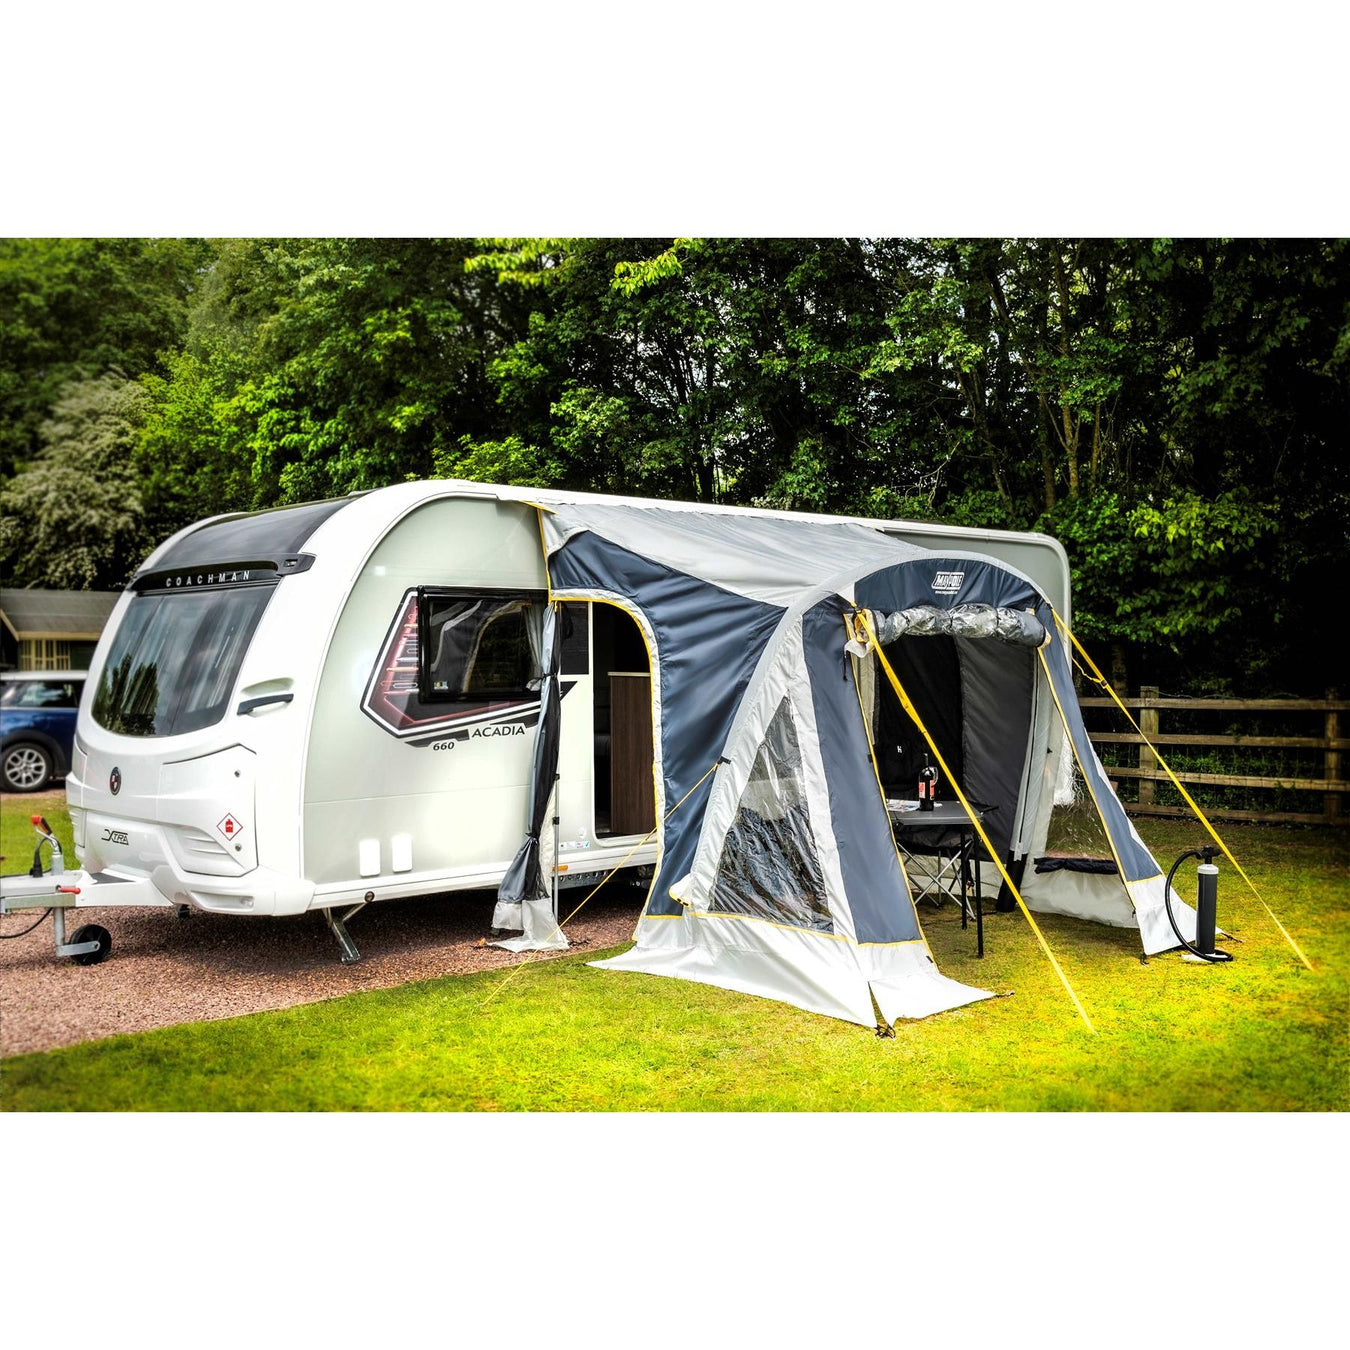 Maypole Inflatable Campsite Air Porch Awning For Caravans & Motorhomes MP9508 - UK Camping And Leisure